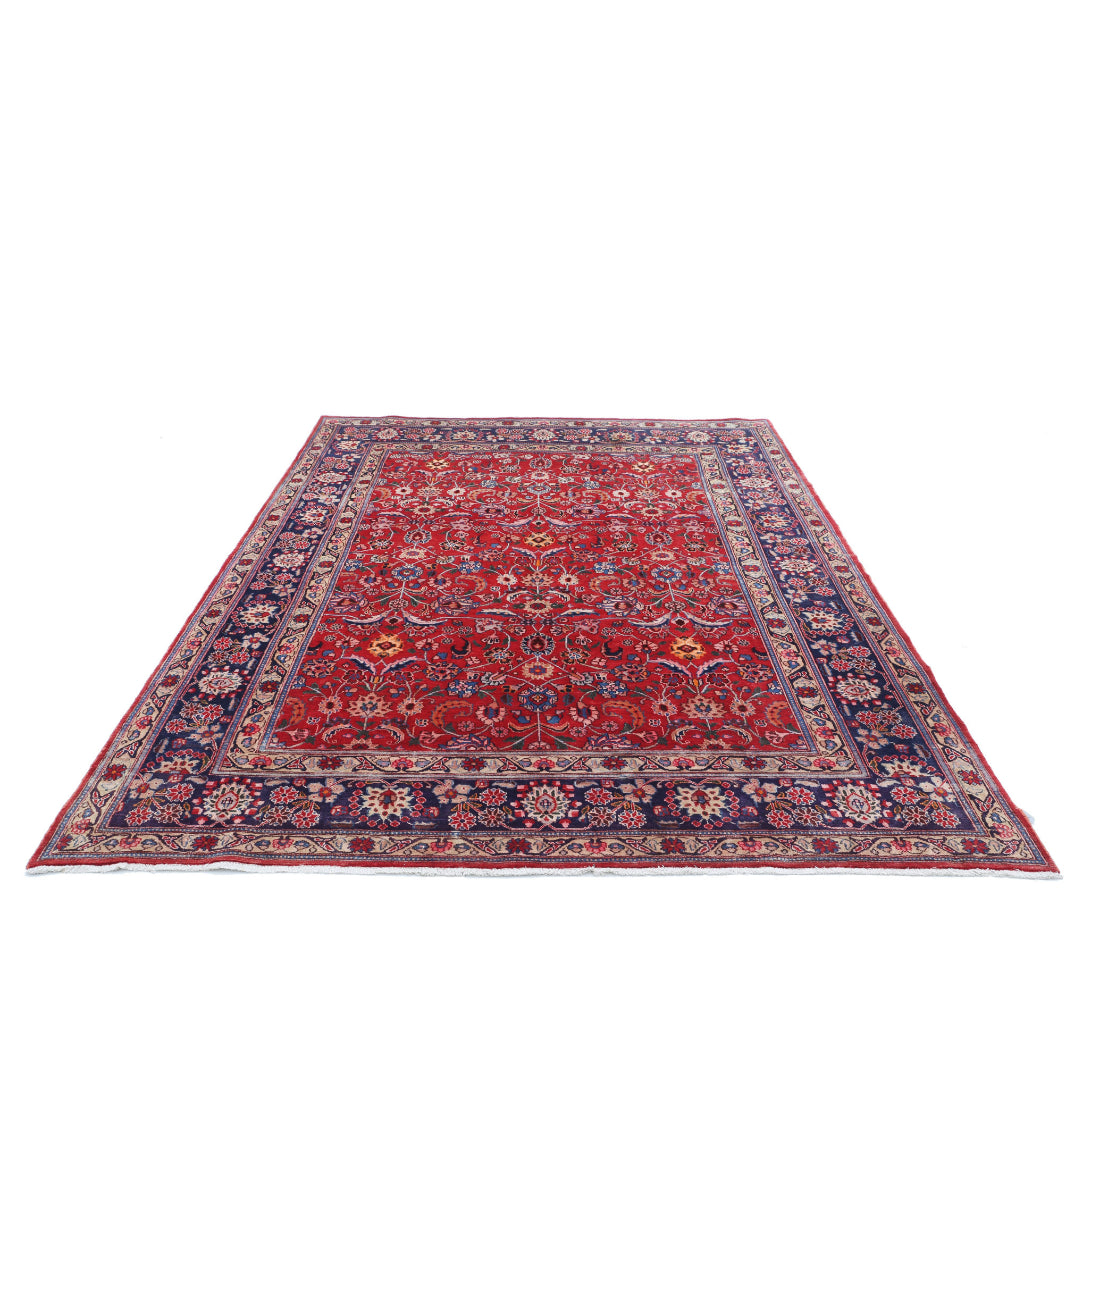 Hand Knotted Persian Mahal Wool Rug - 6'9'' x 9'6'' 6'9'' x 9'6'' (203 X 285) / Red / Blue